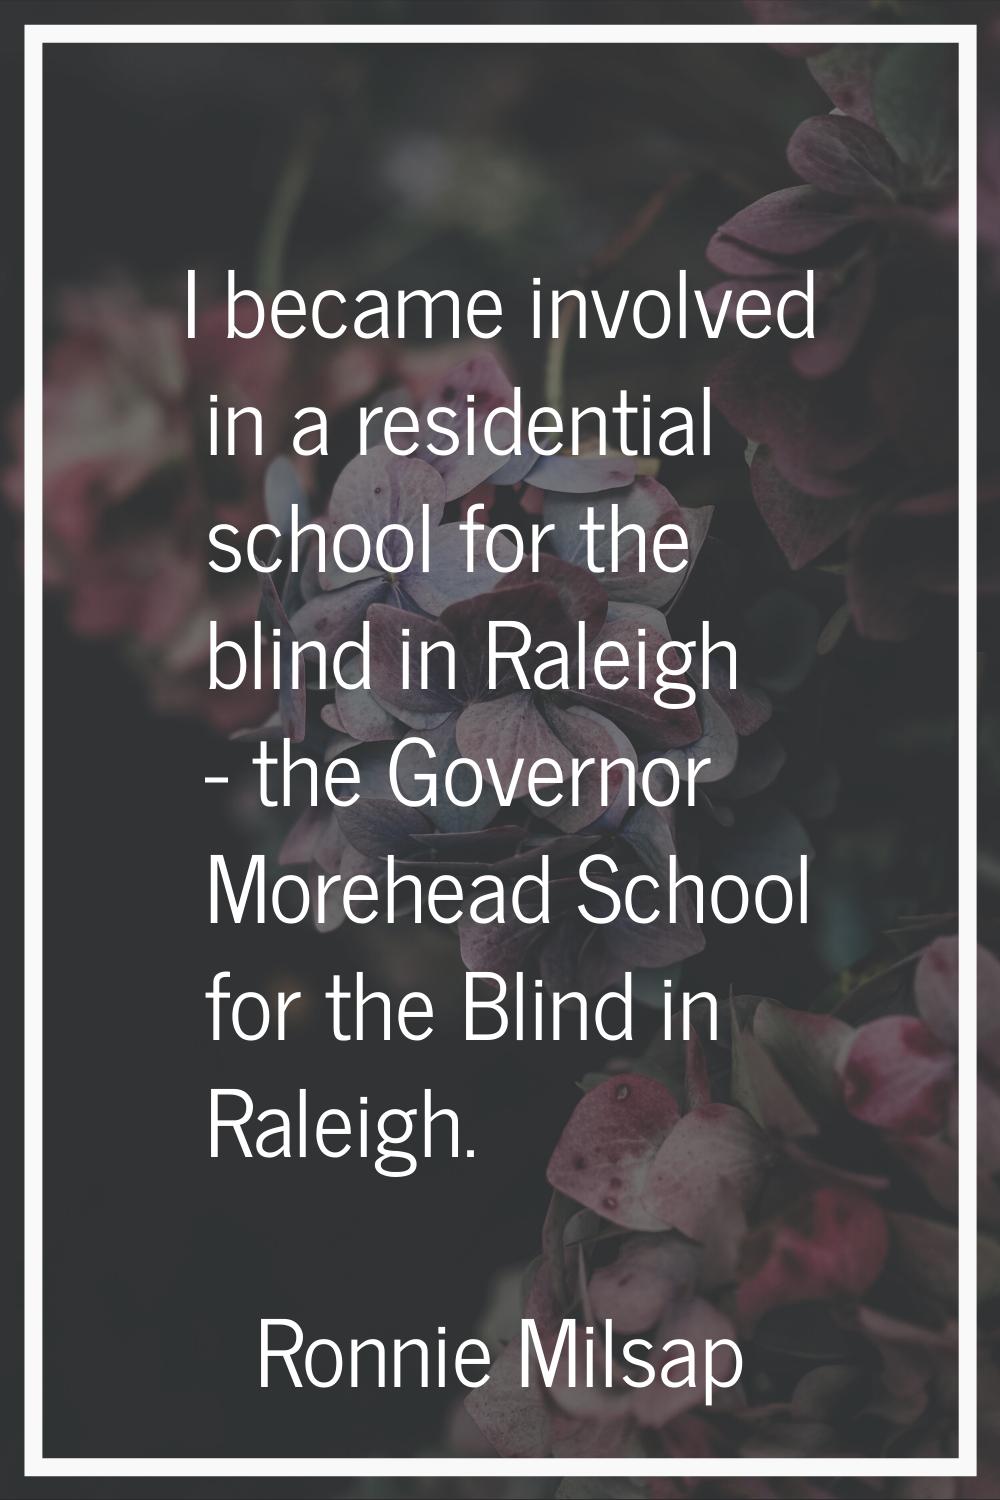 I became involved in a residential school for the blind in Raleigh - the Governor Morehead School f